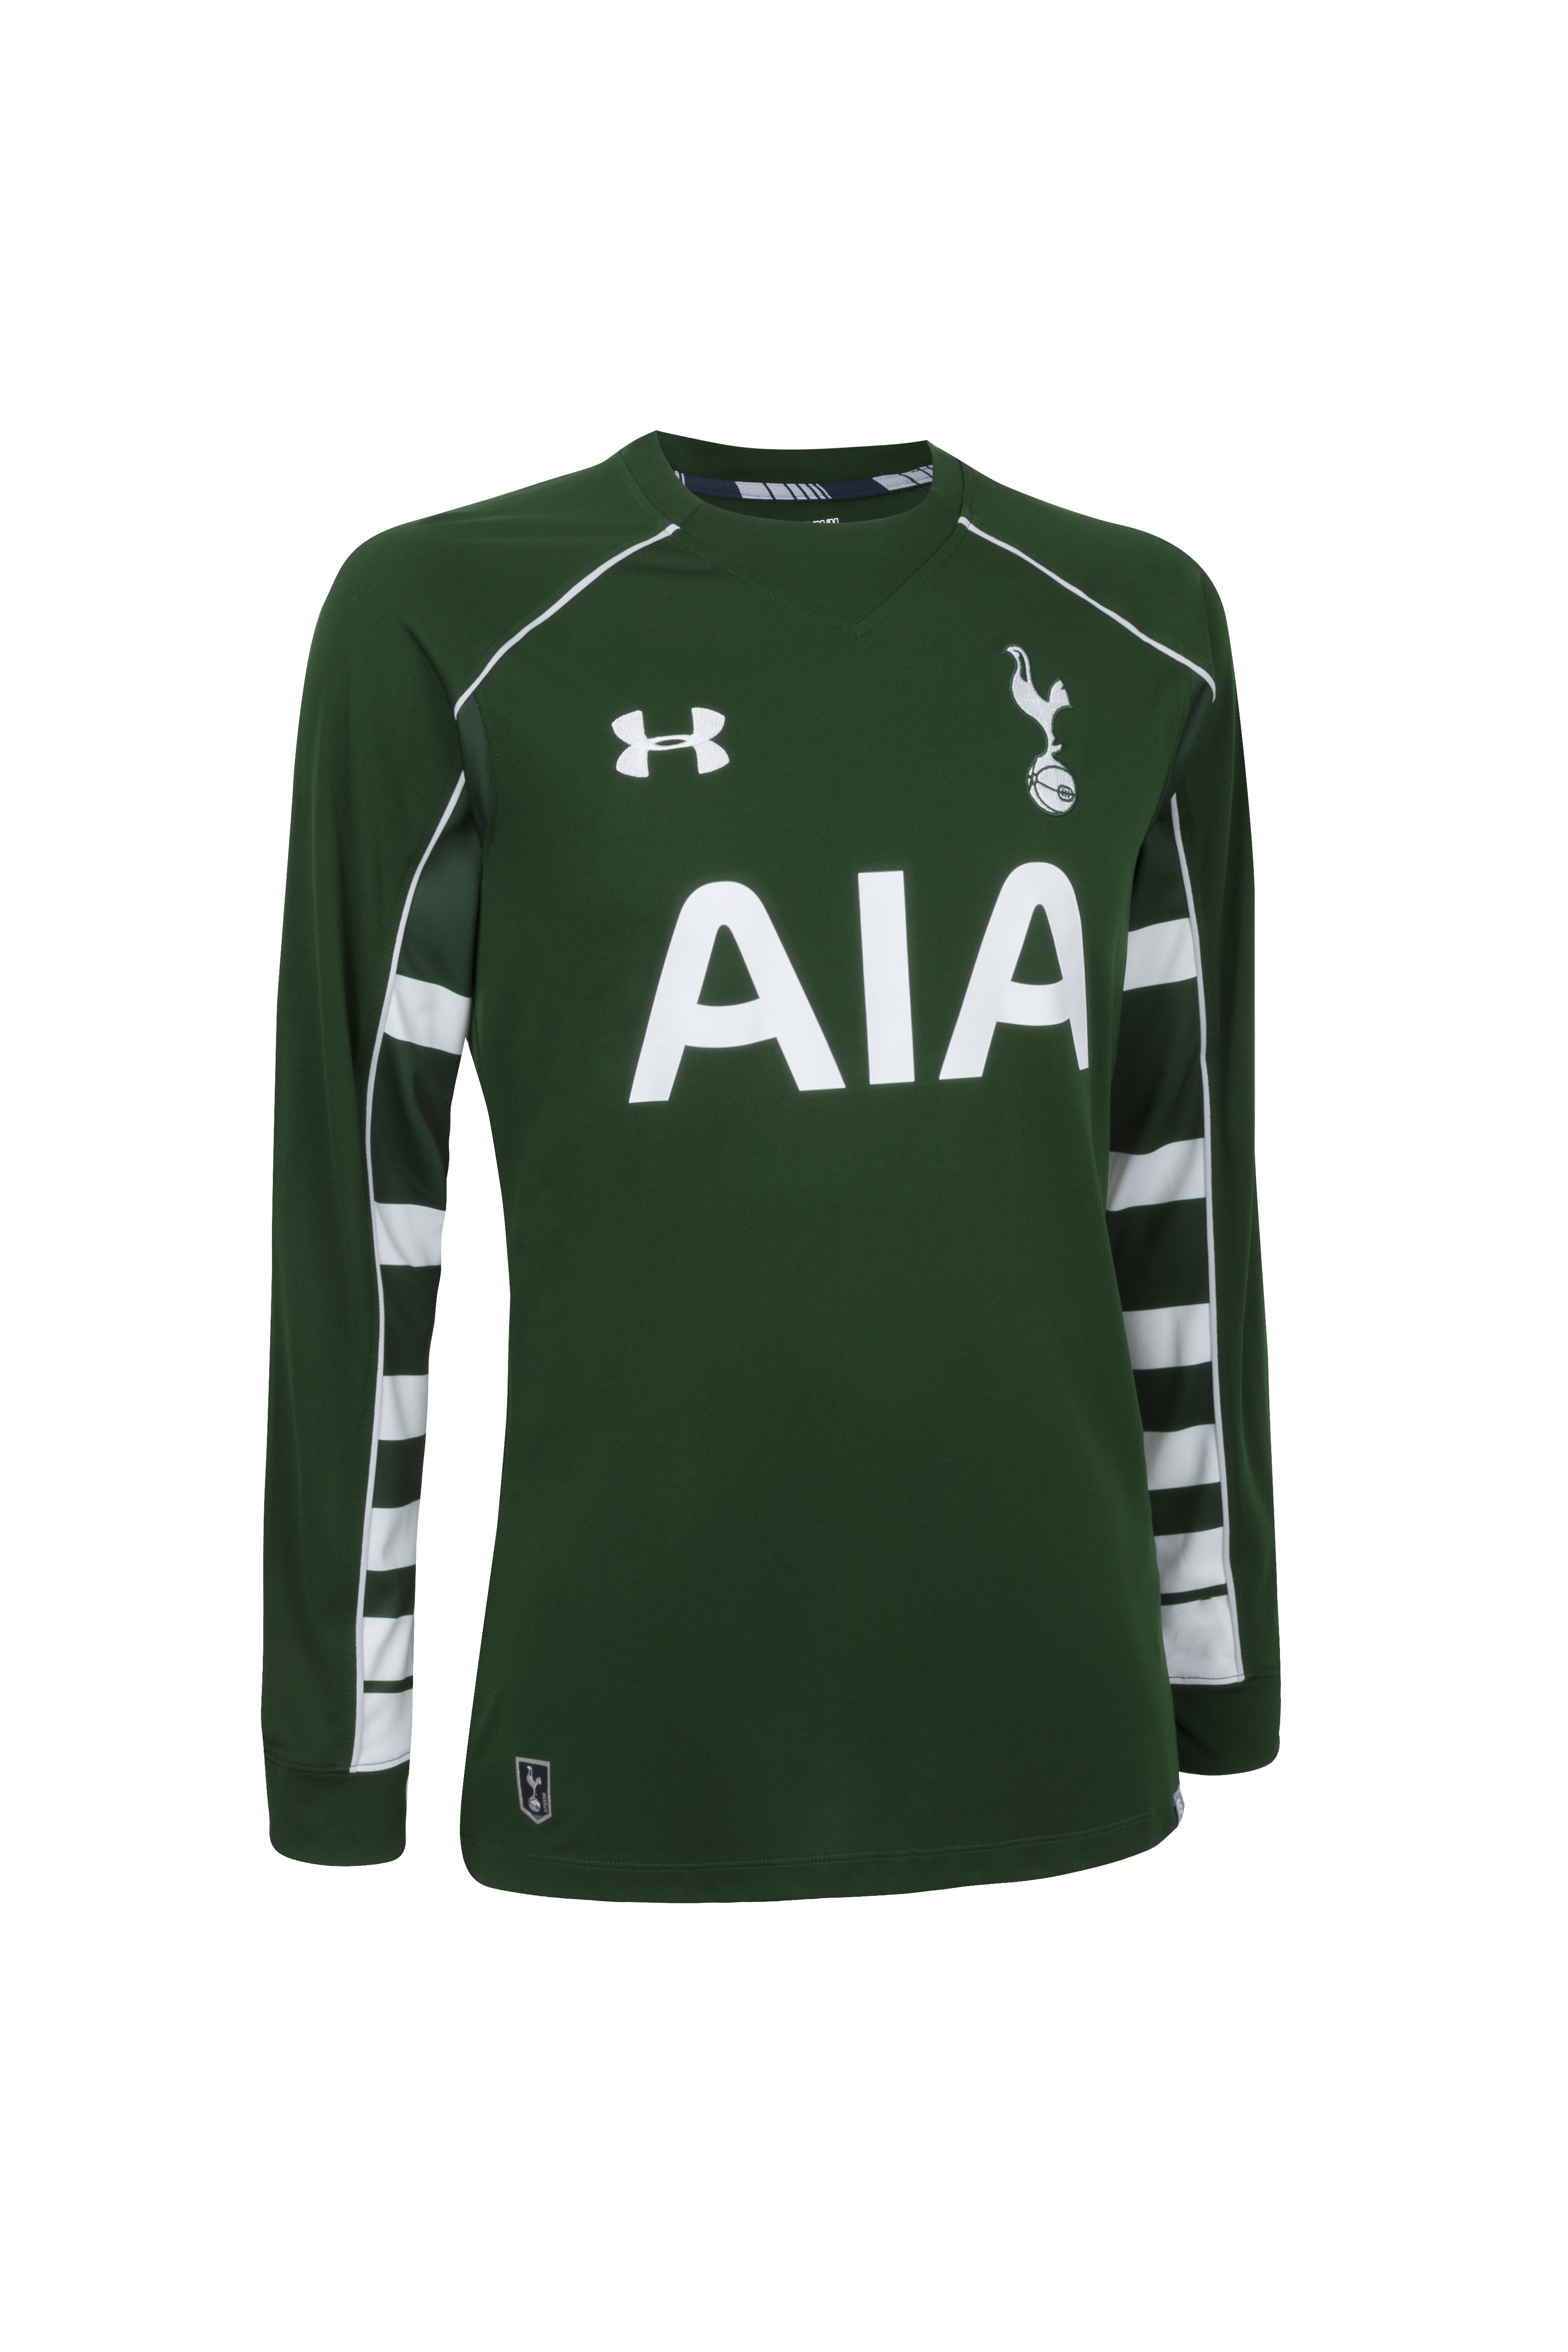 Spurs 15/16 Away by Under Armour - SoccerBible